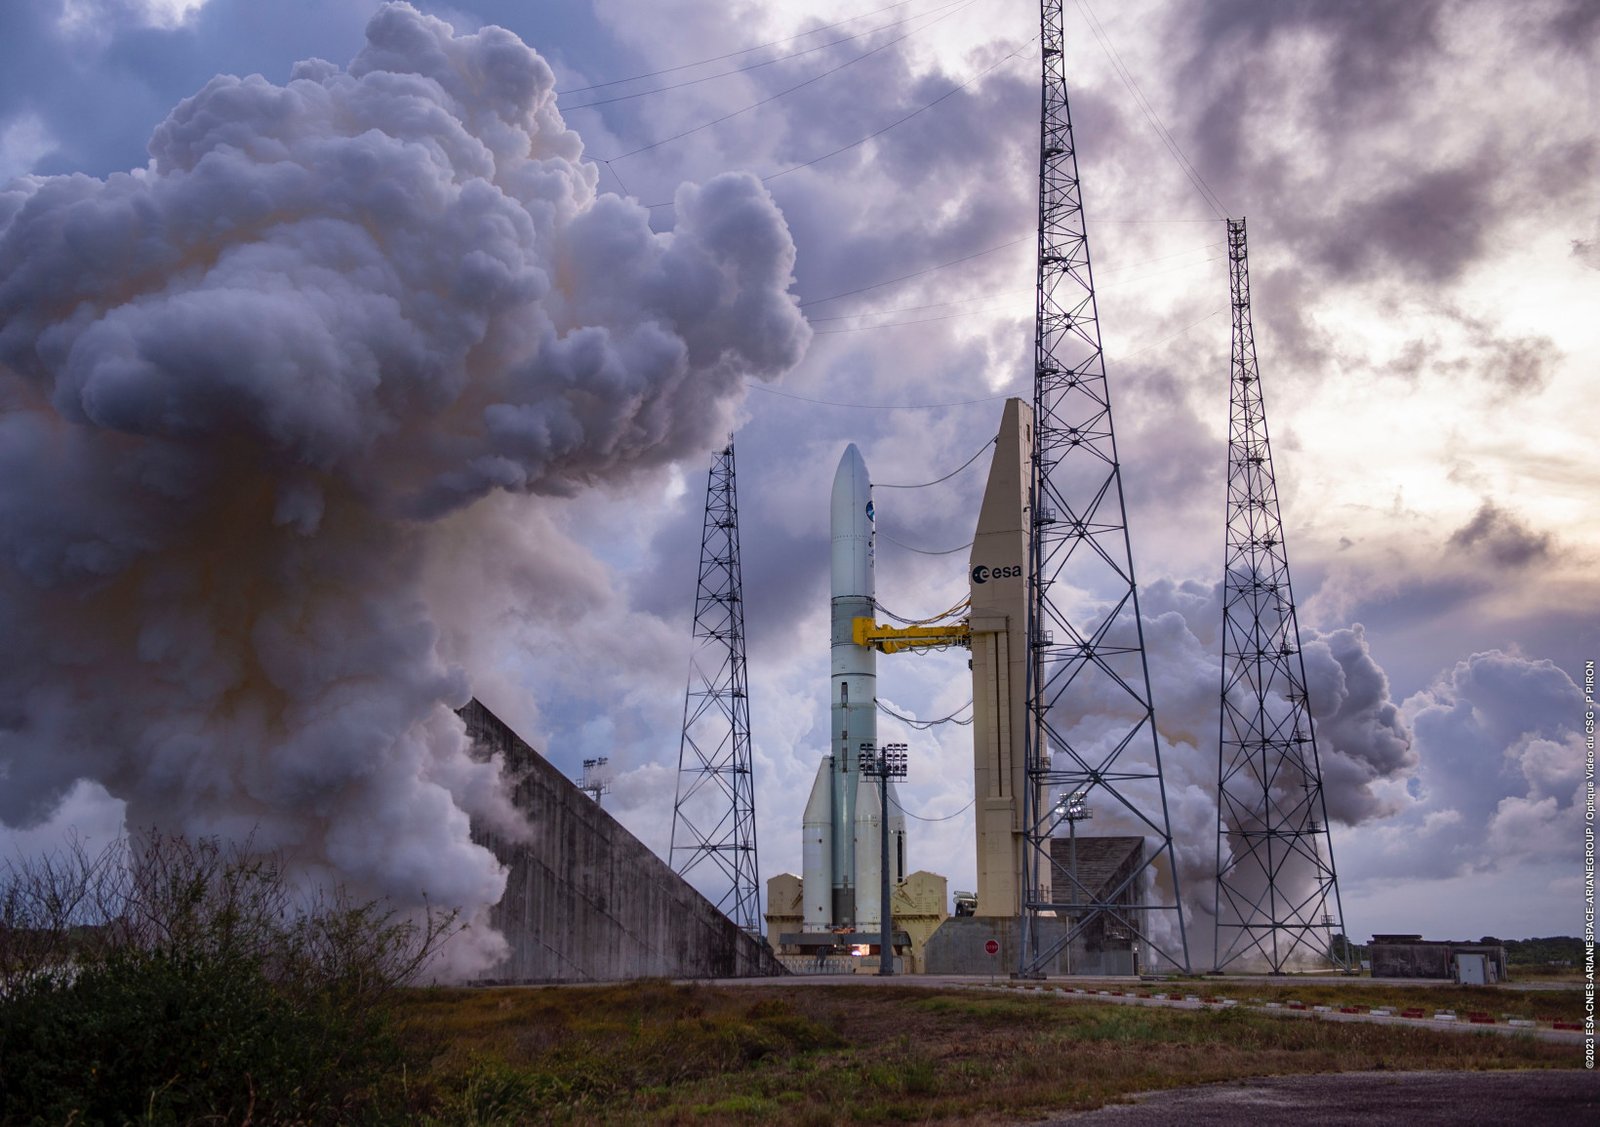 An image of the Ariane 6 hot fire test